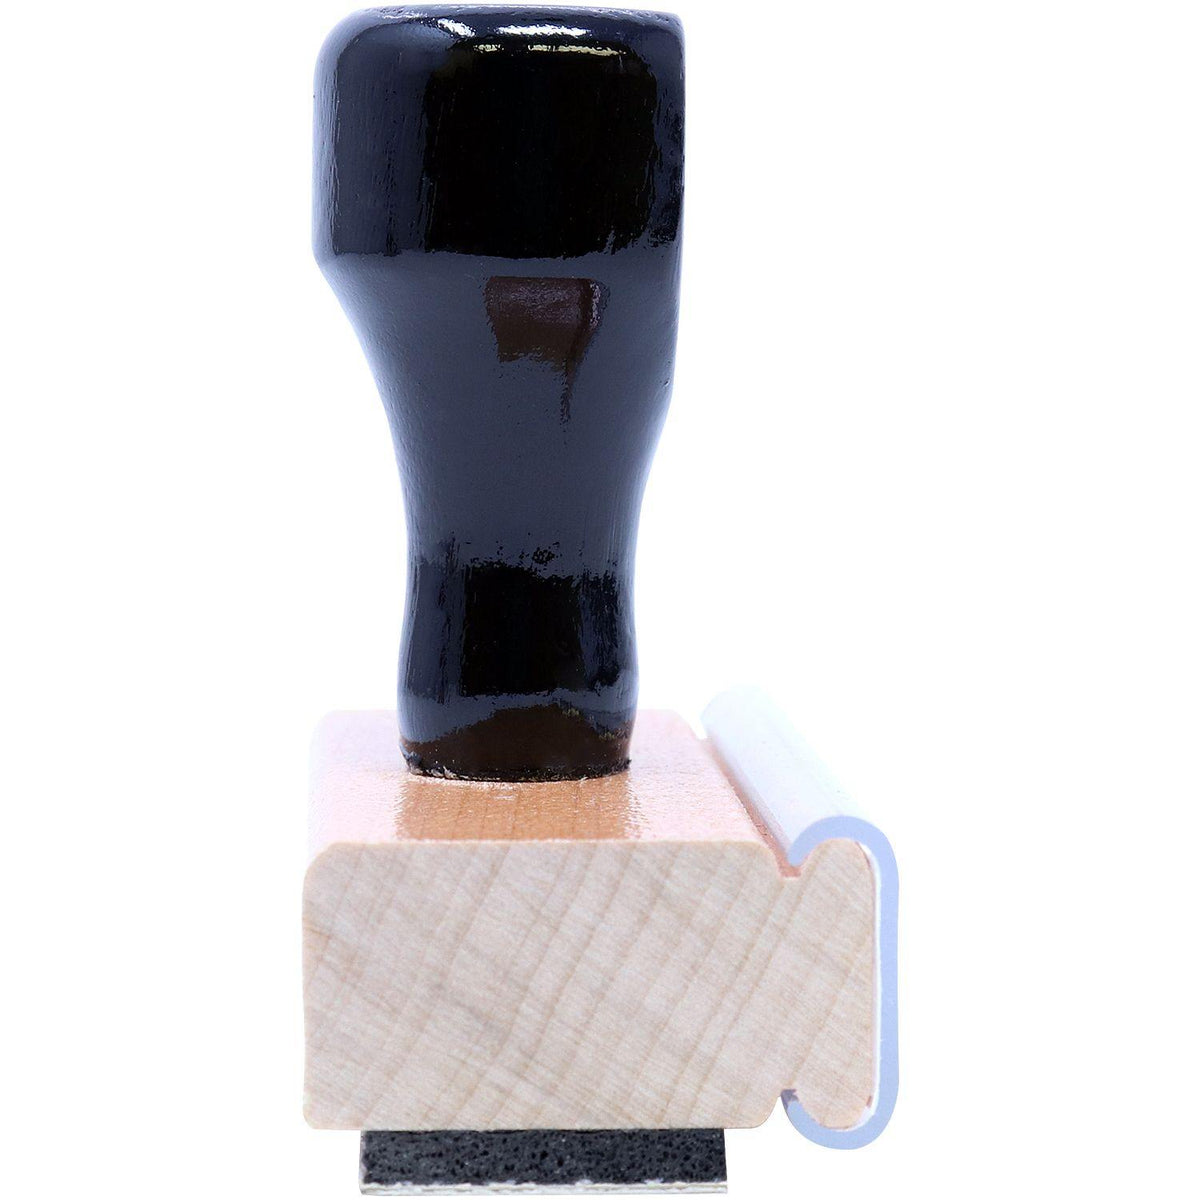 Large Witness Rubber Stamp - Engineer Seal Stamps - Brand_Acorn, Impression Size_Large, Stamp Type_Regular Stamp, Type of Use_Legal